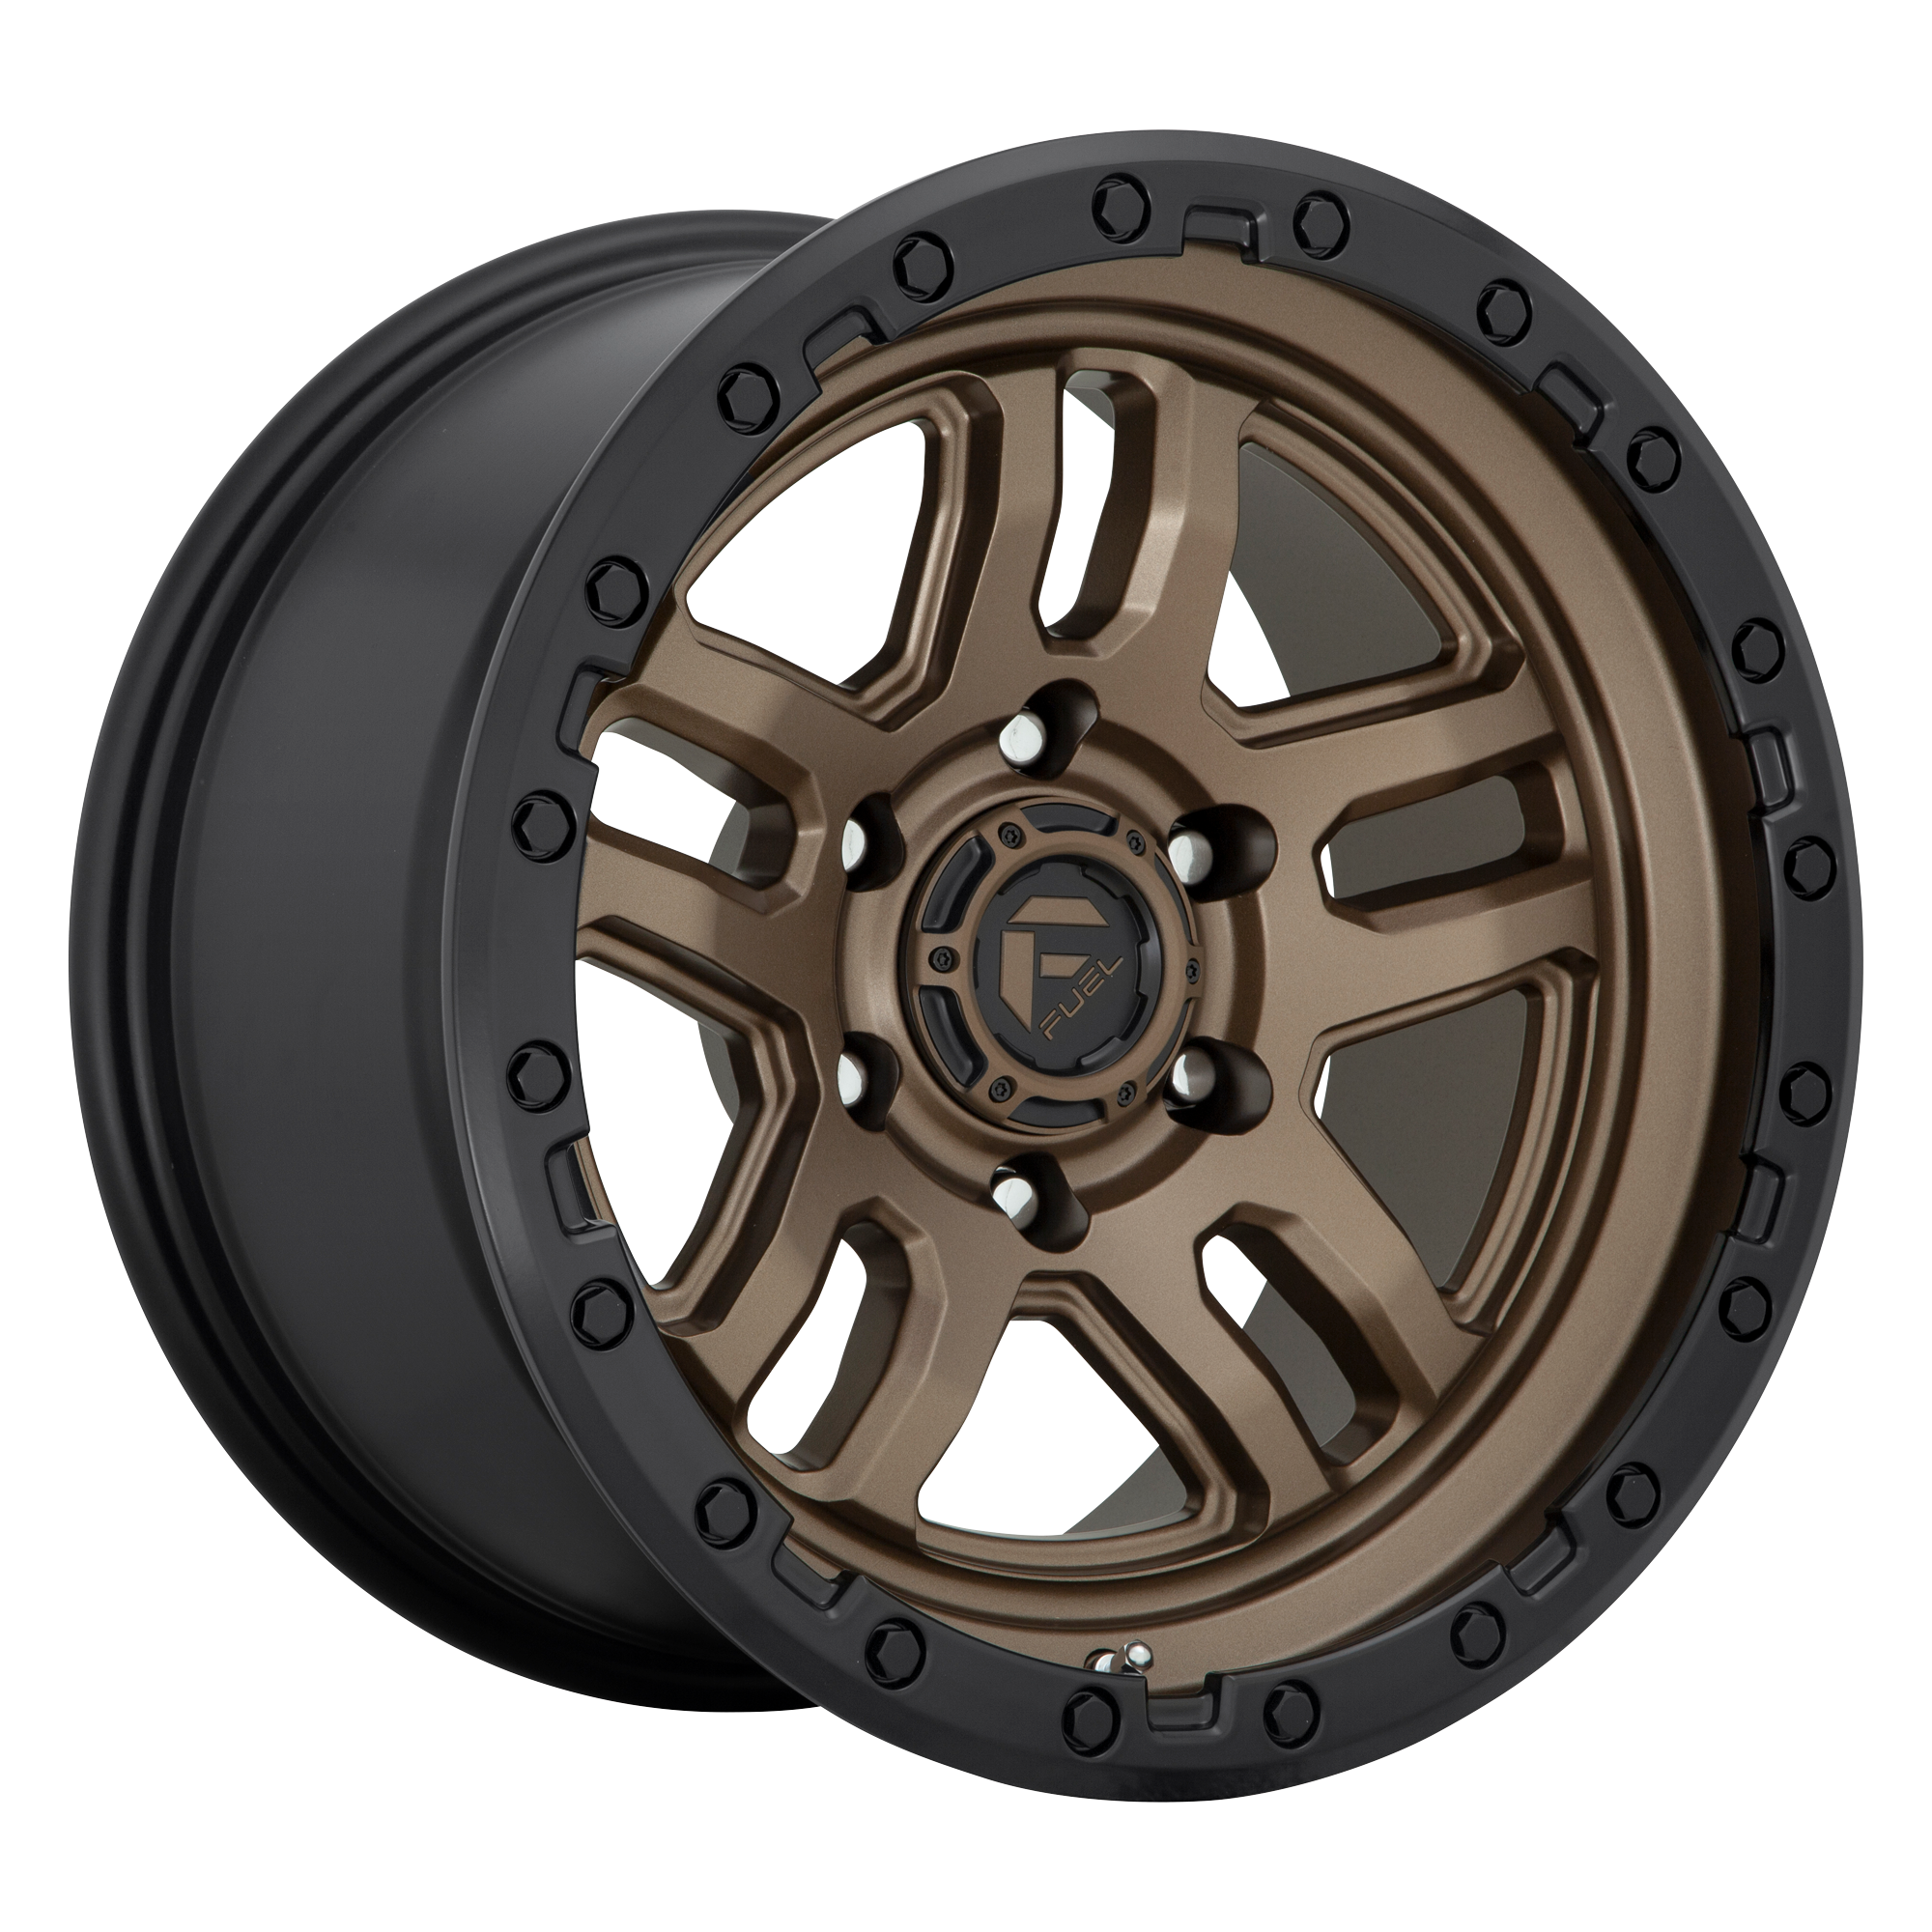 AMMO 20x9 6x135.00 MATTE BRONZE BLACK BEAD RING (20 mm) - Tires and Engine Performance